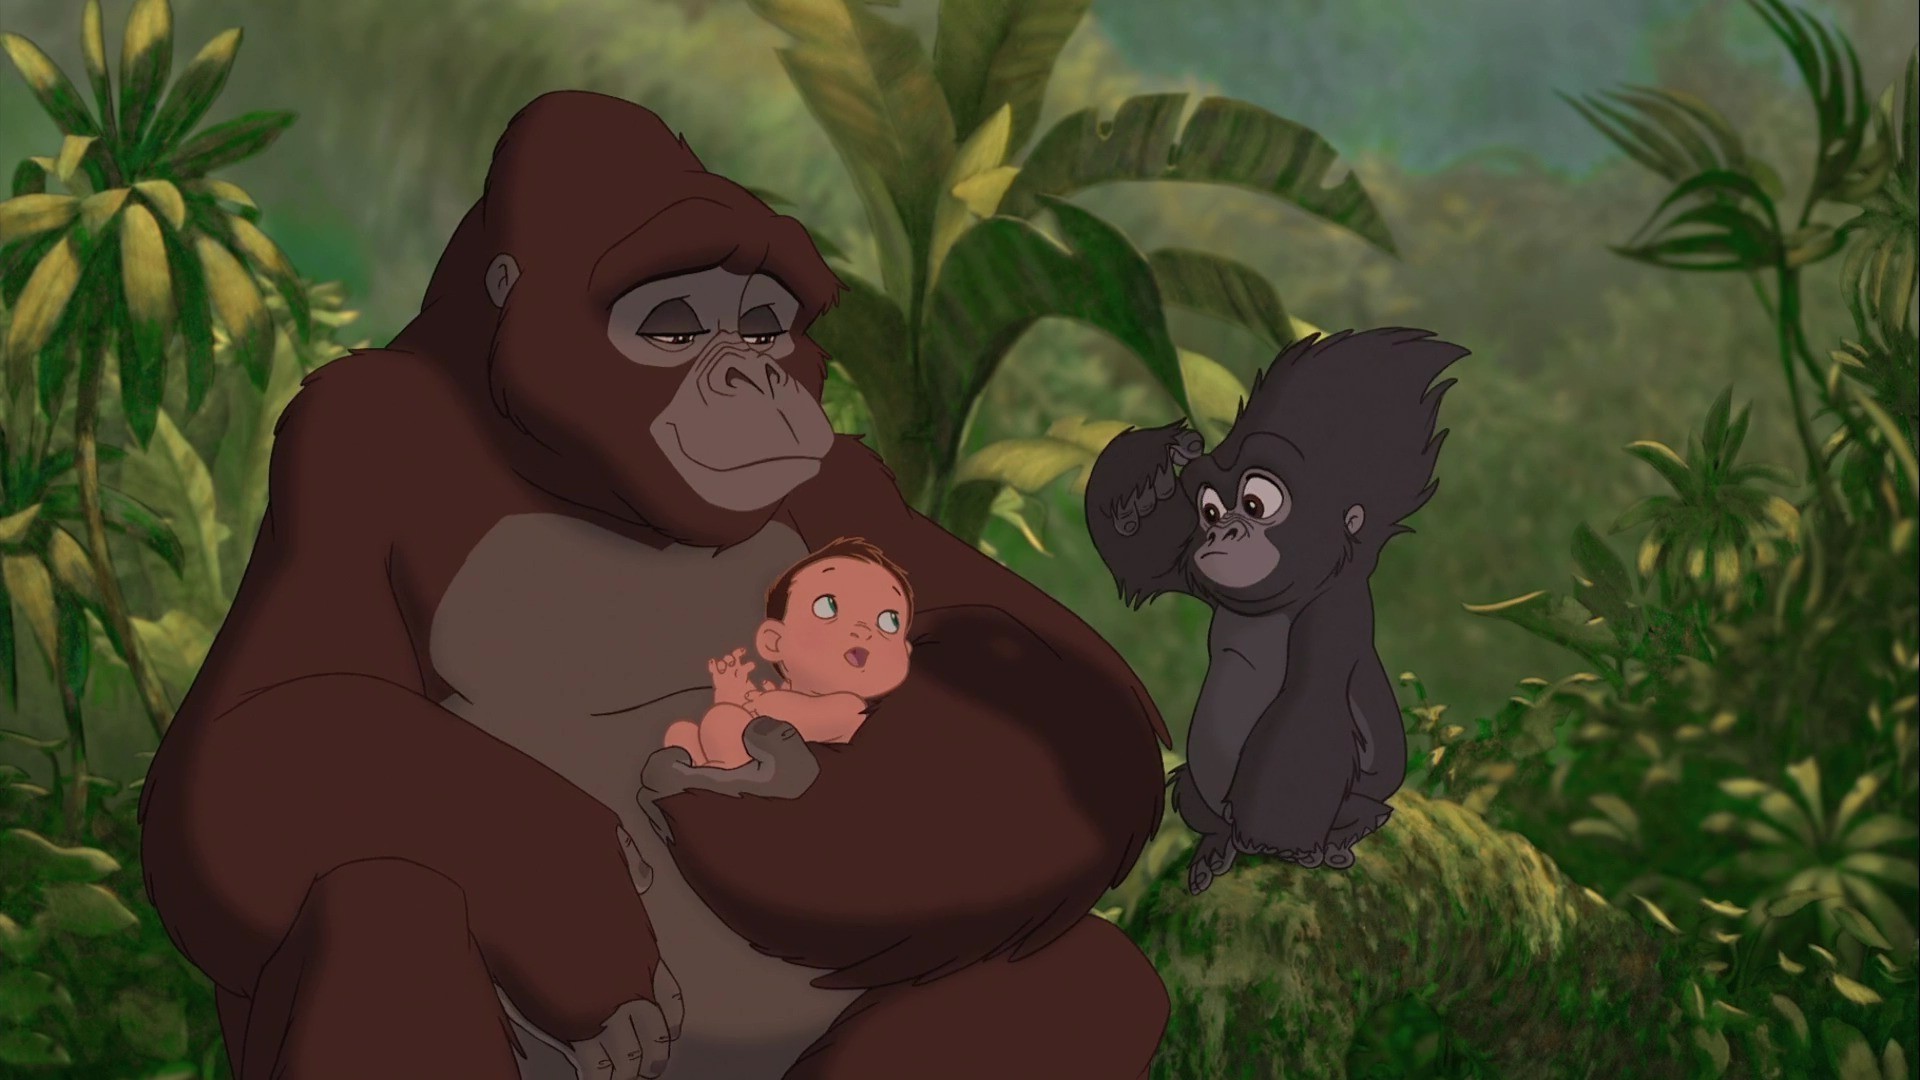 A shot from the cartoon "Tarzan" with a baby and two gorillas wal...